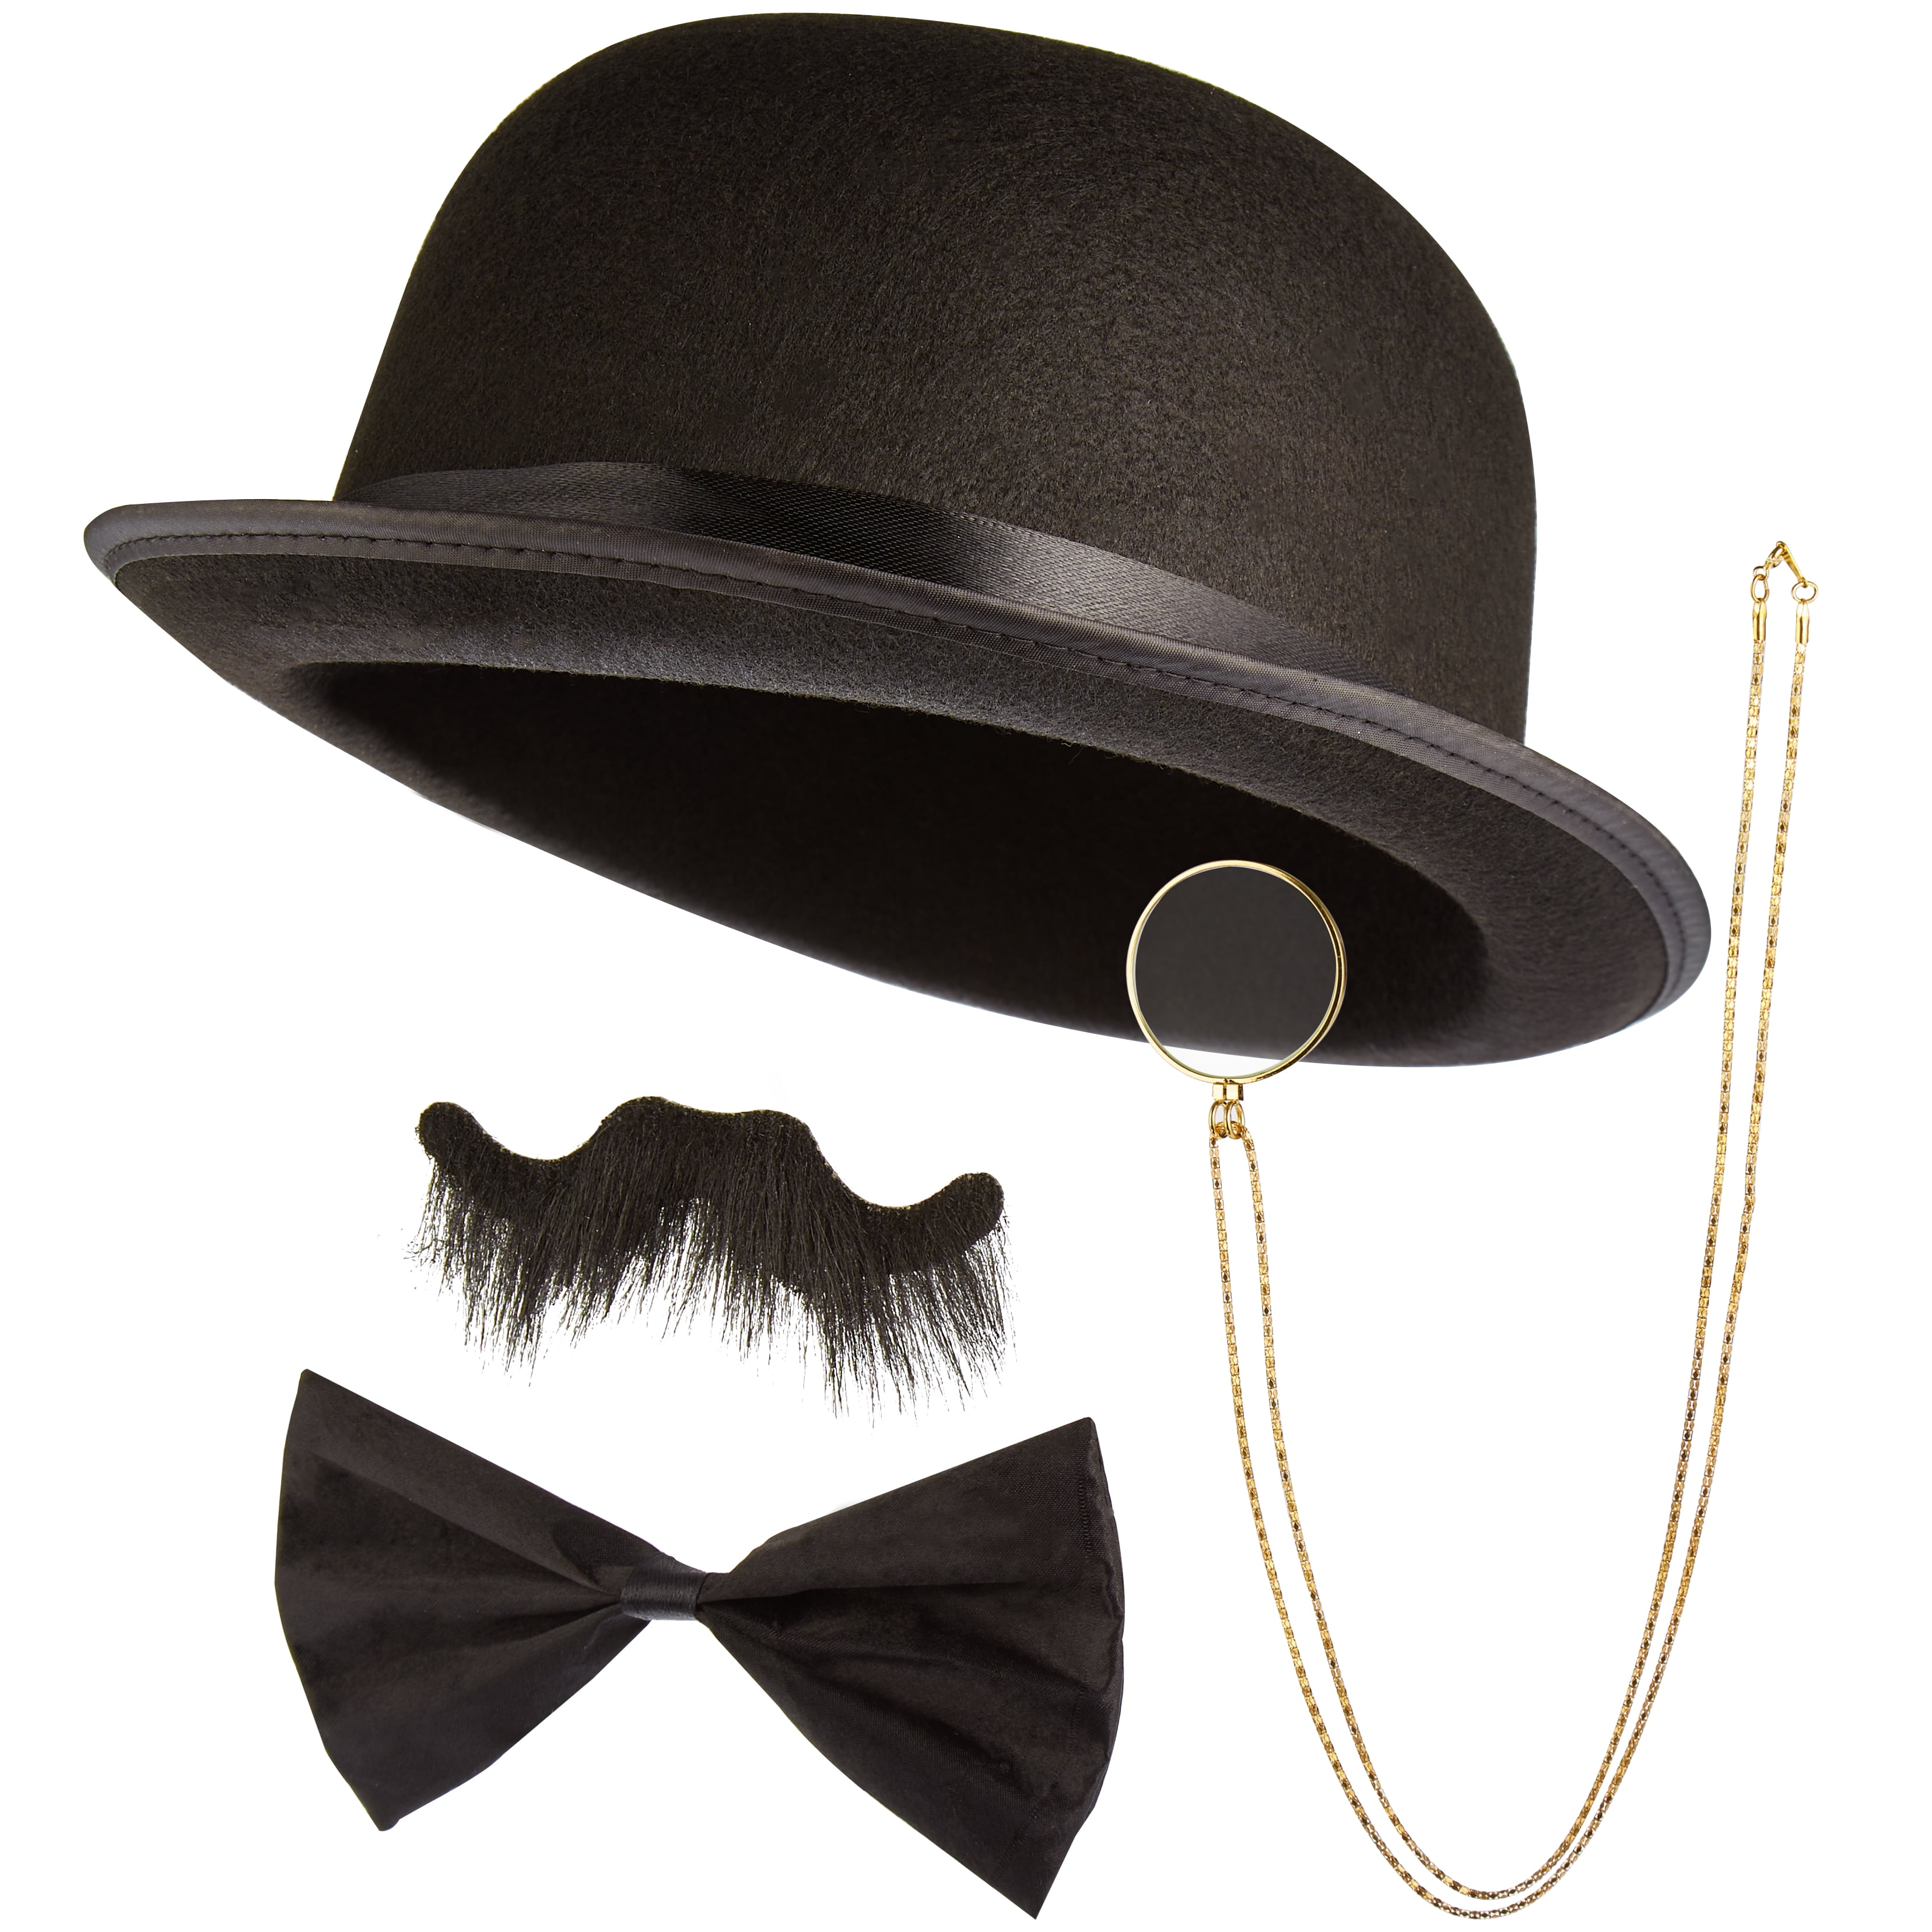 Black 1920s Fake Monocle On Cord Old Gentlemans Fancy Dress Costume Accessory 